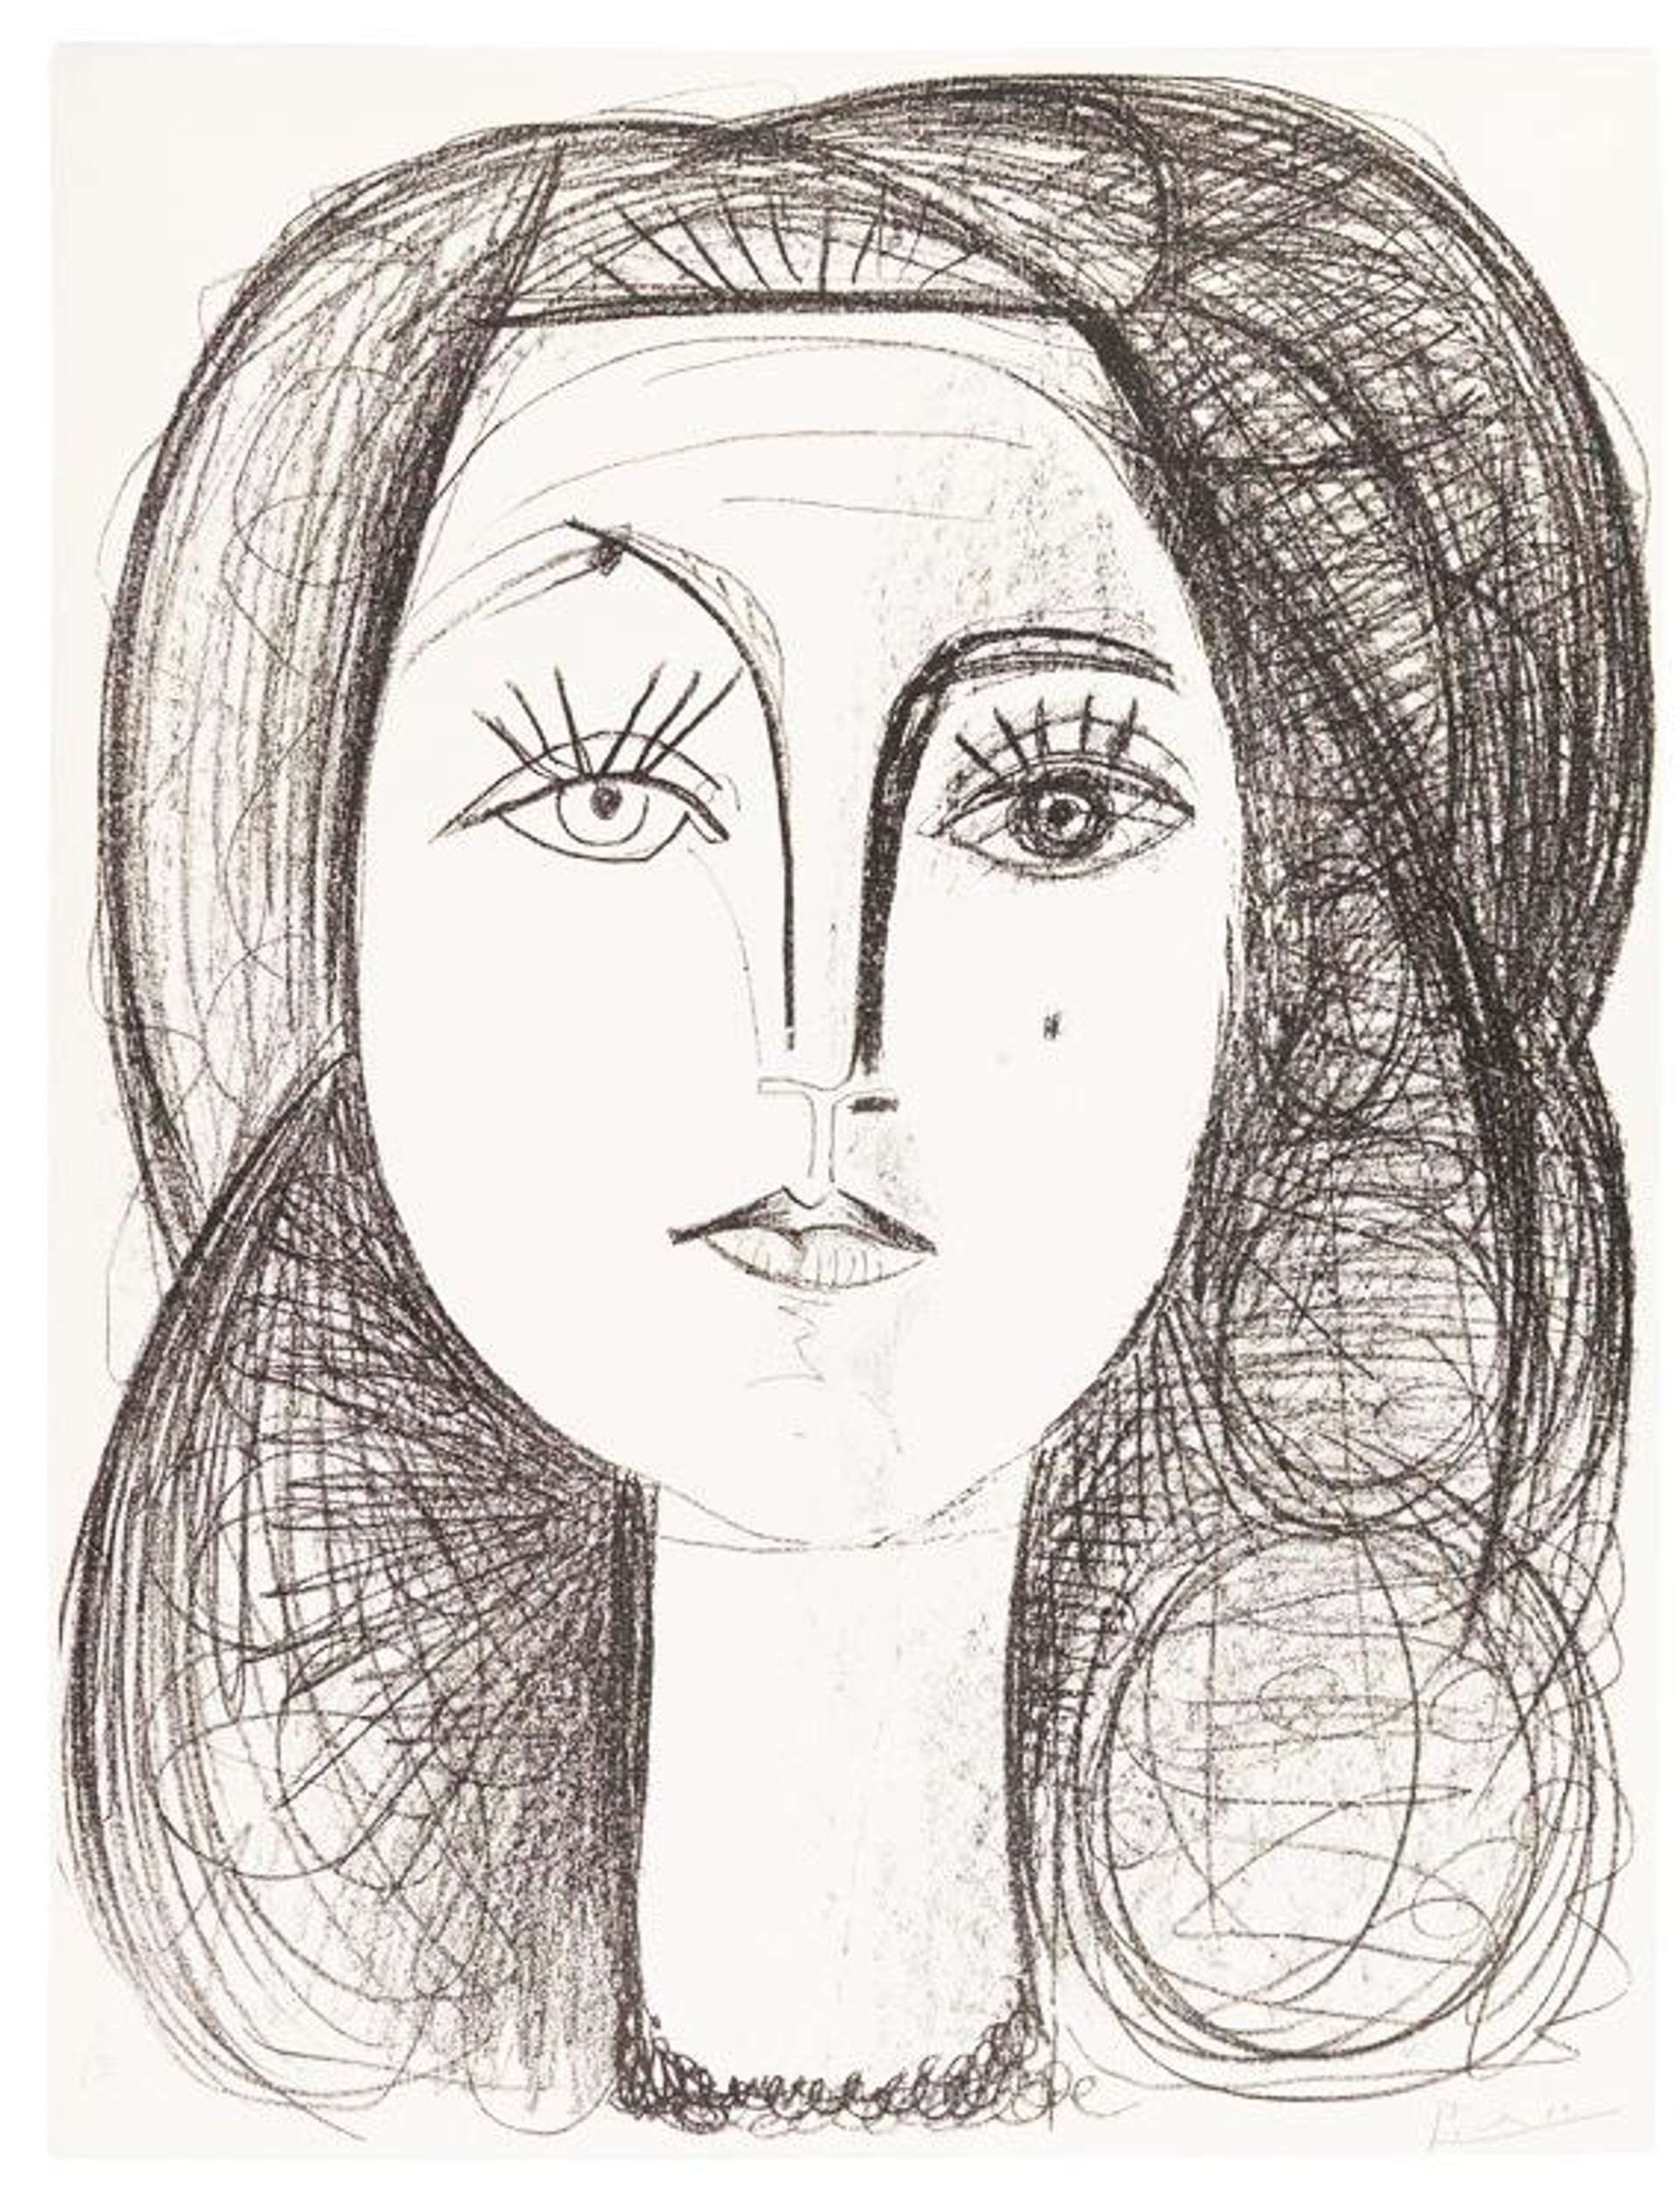 A stylised portrait of Françoise Gilot by Pablo Picasso. She is shown gazing at the viewer, depicted in a graphic style.